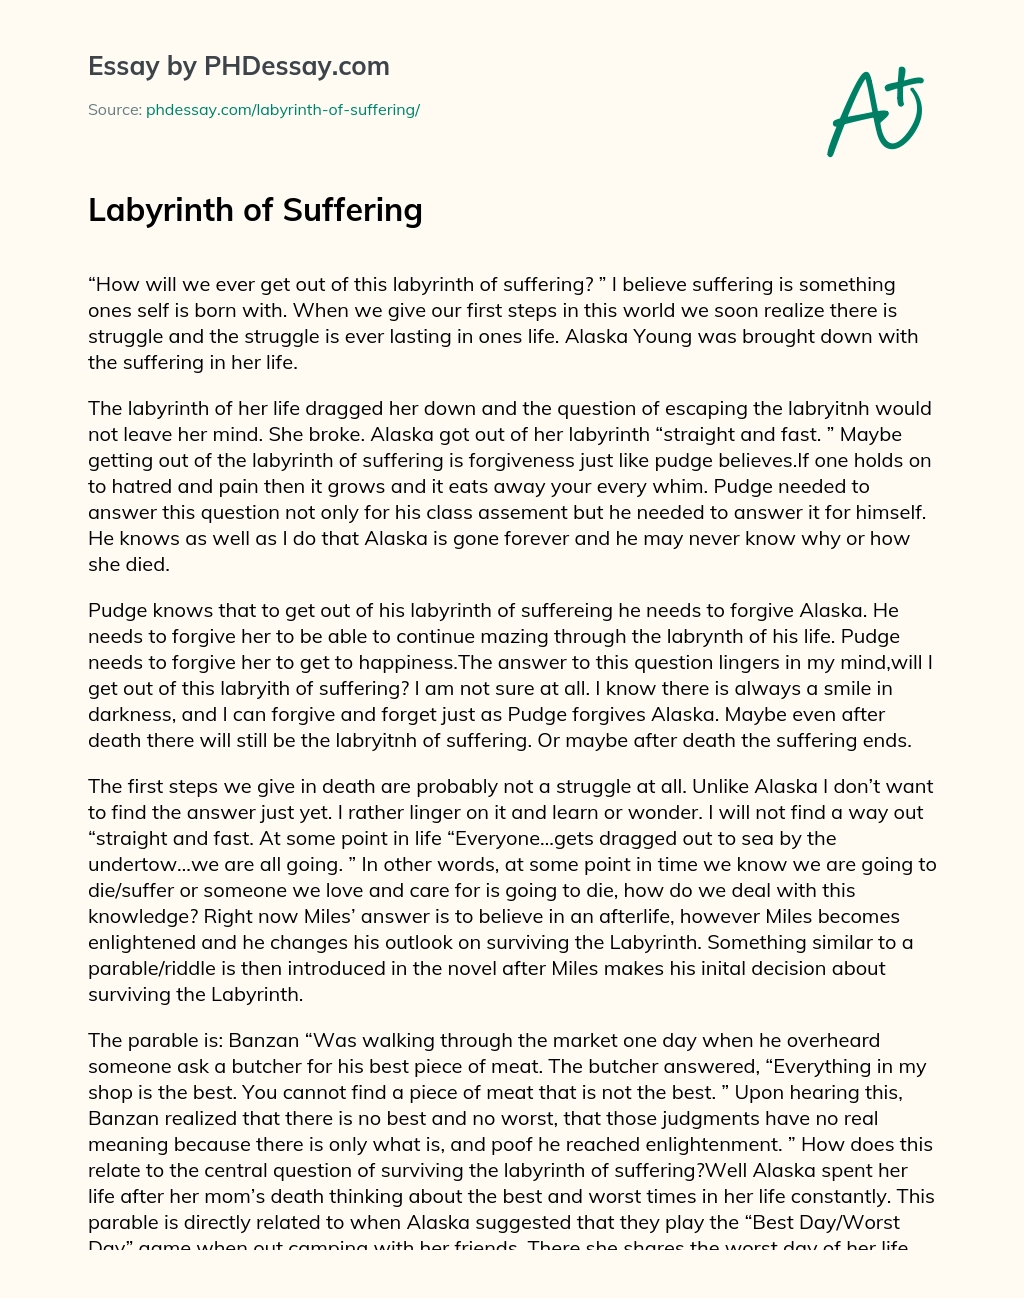 Labyrinth of Suffering essay